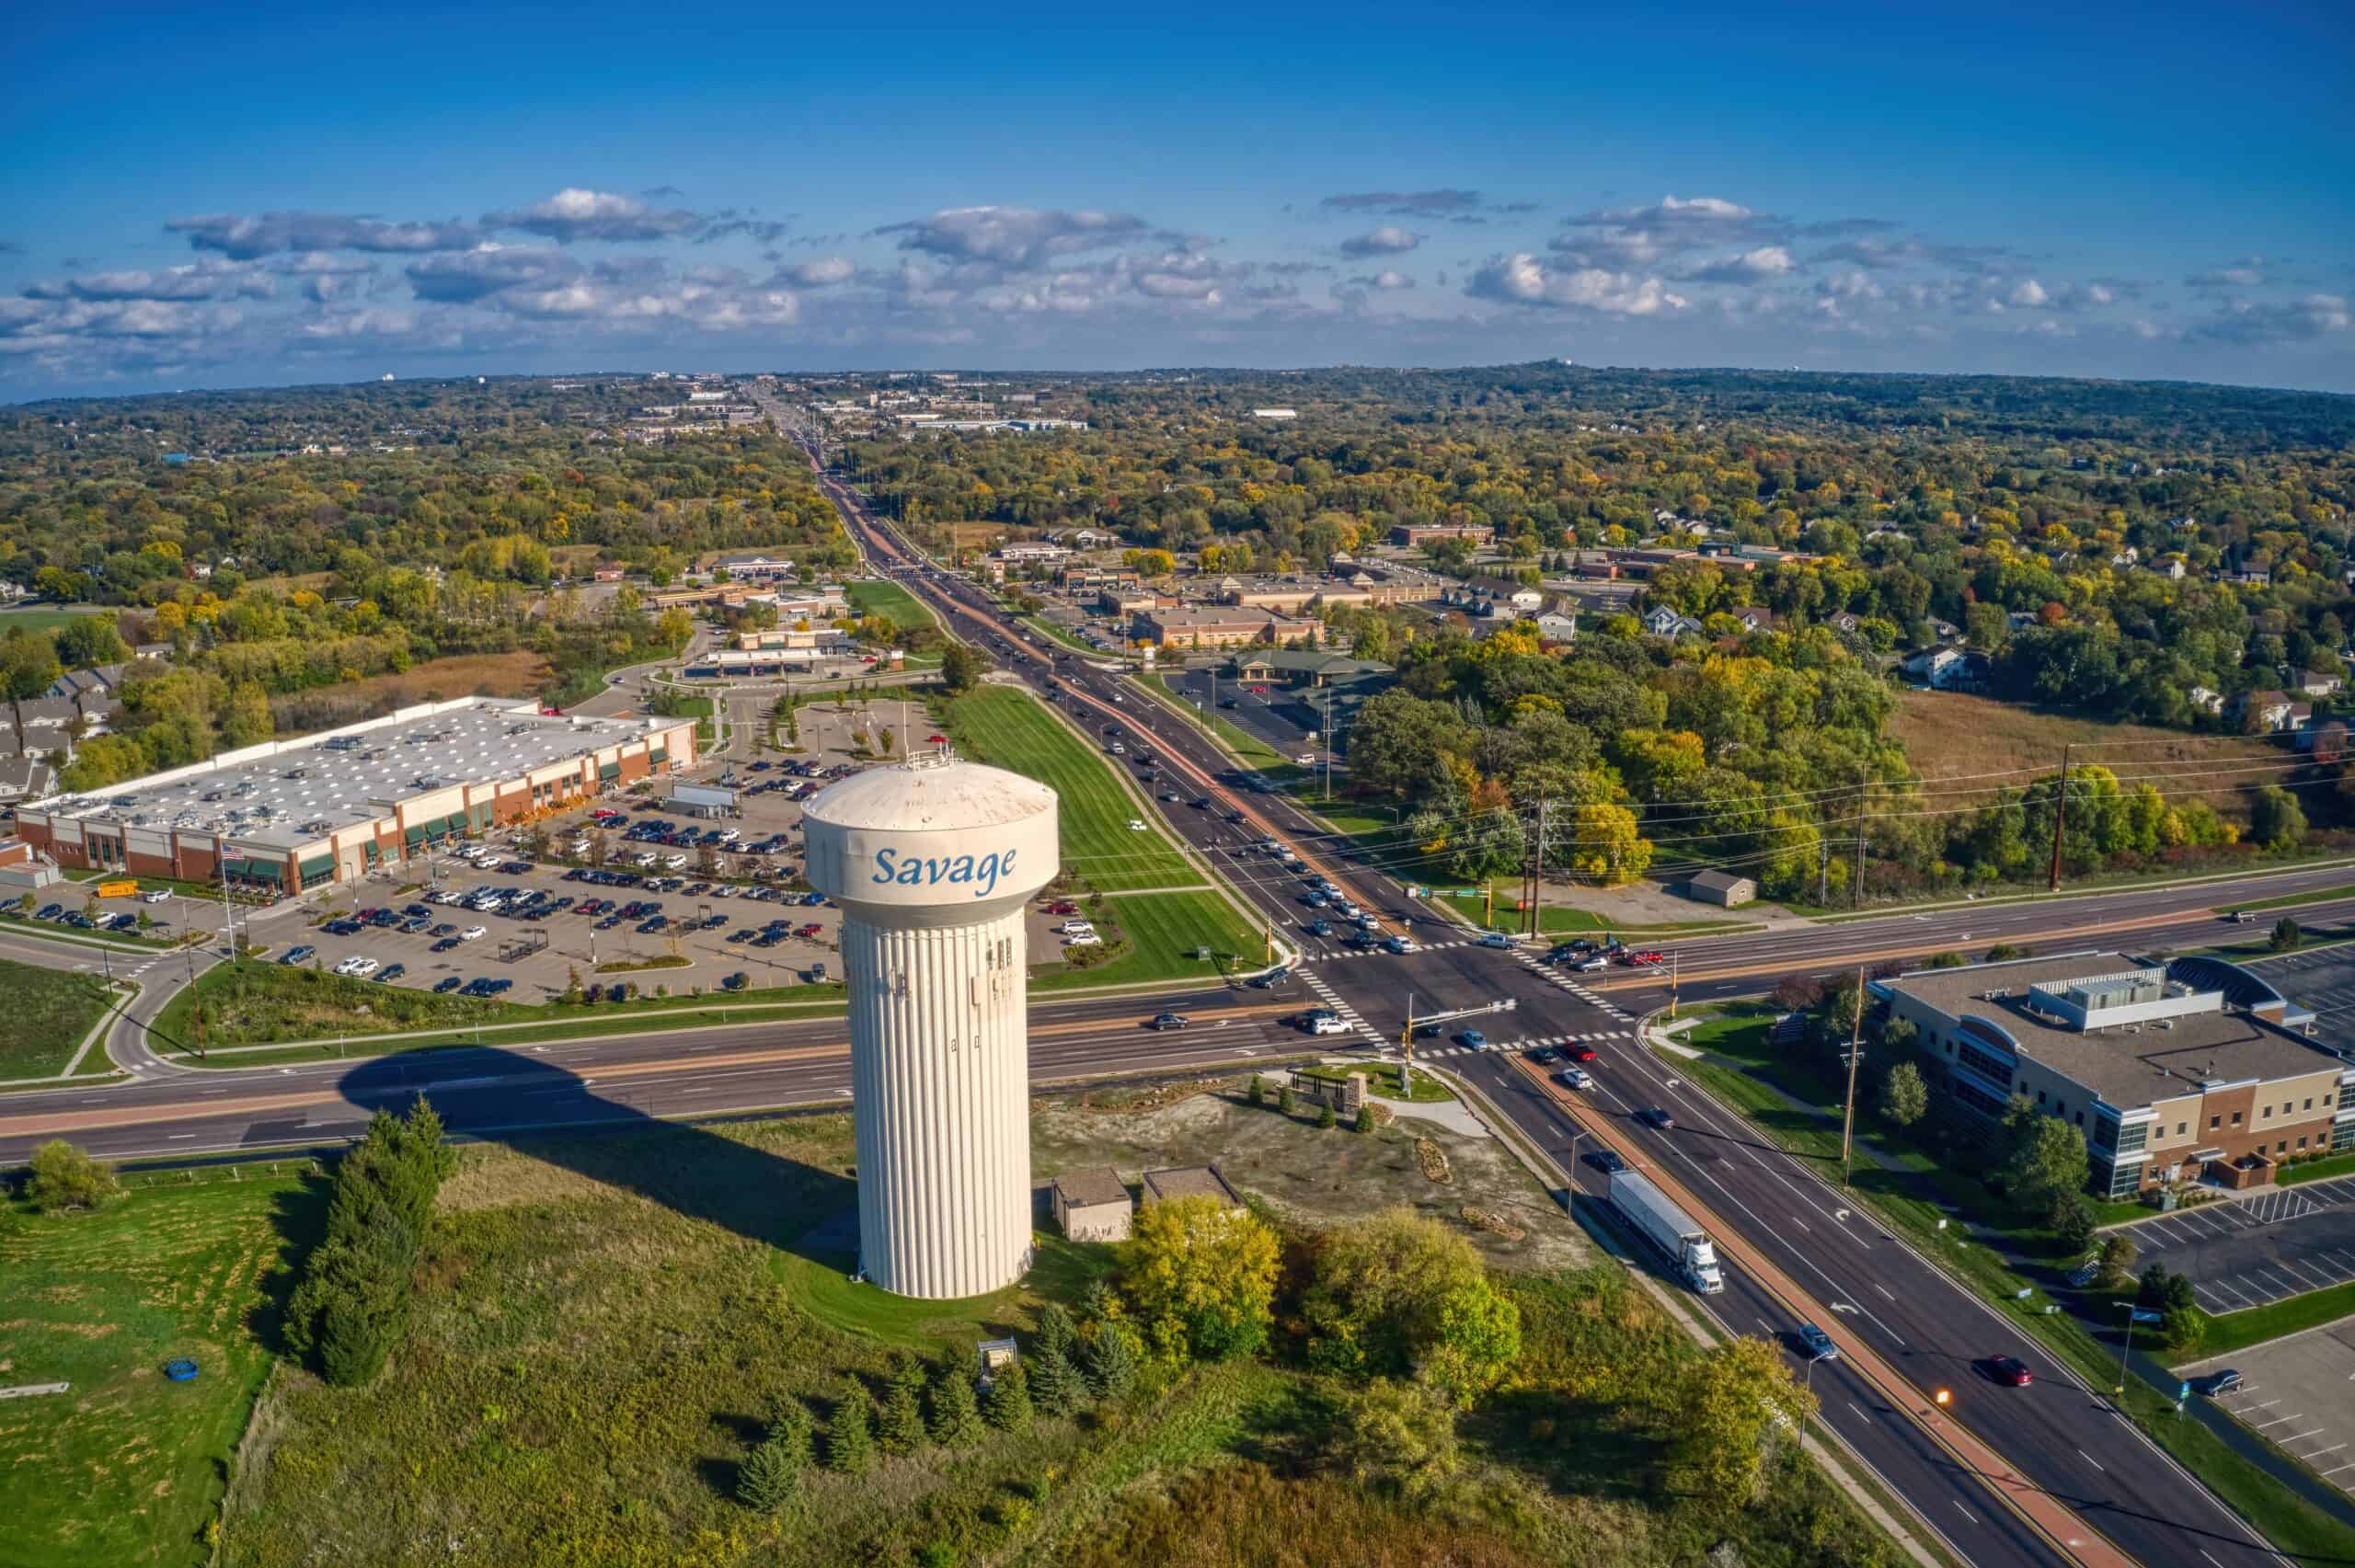 Savage, Minnesota | Aerial view of the Twin Cities Outer Suburb of Savage under a blue sky with clouds in Minnesota